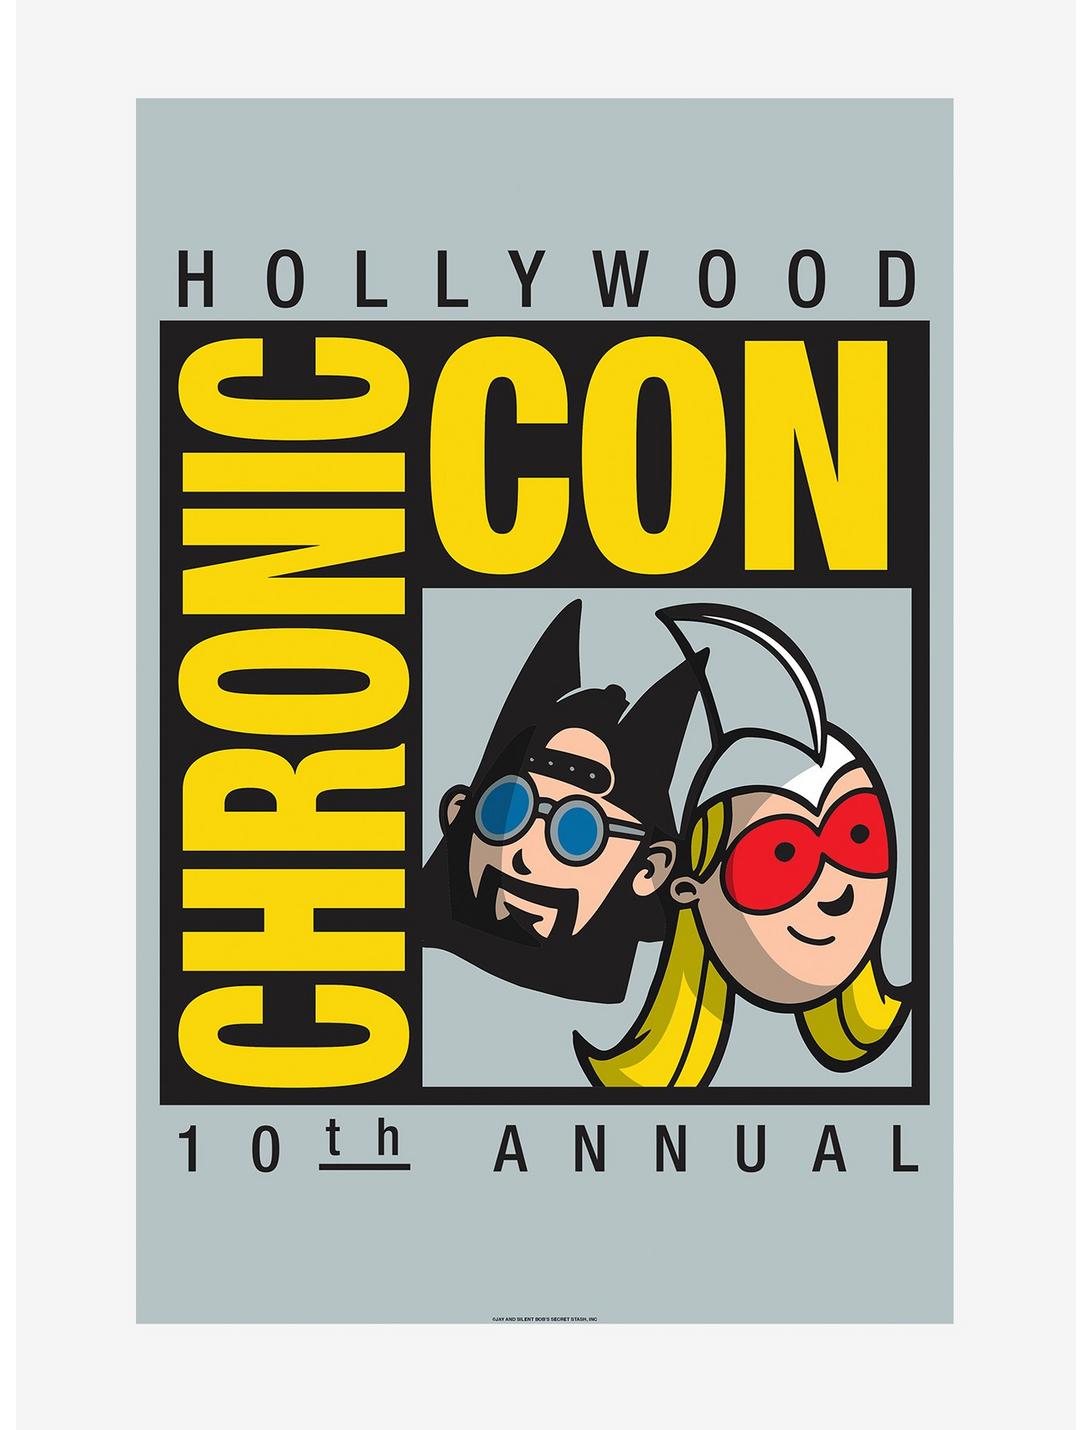 Jay And Silent Bob Reboot Chronic Con Poster, WHITE, hi-res